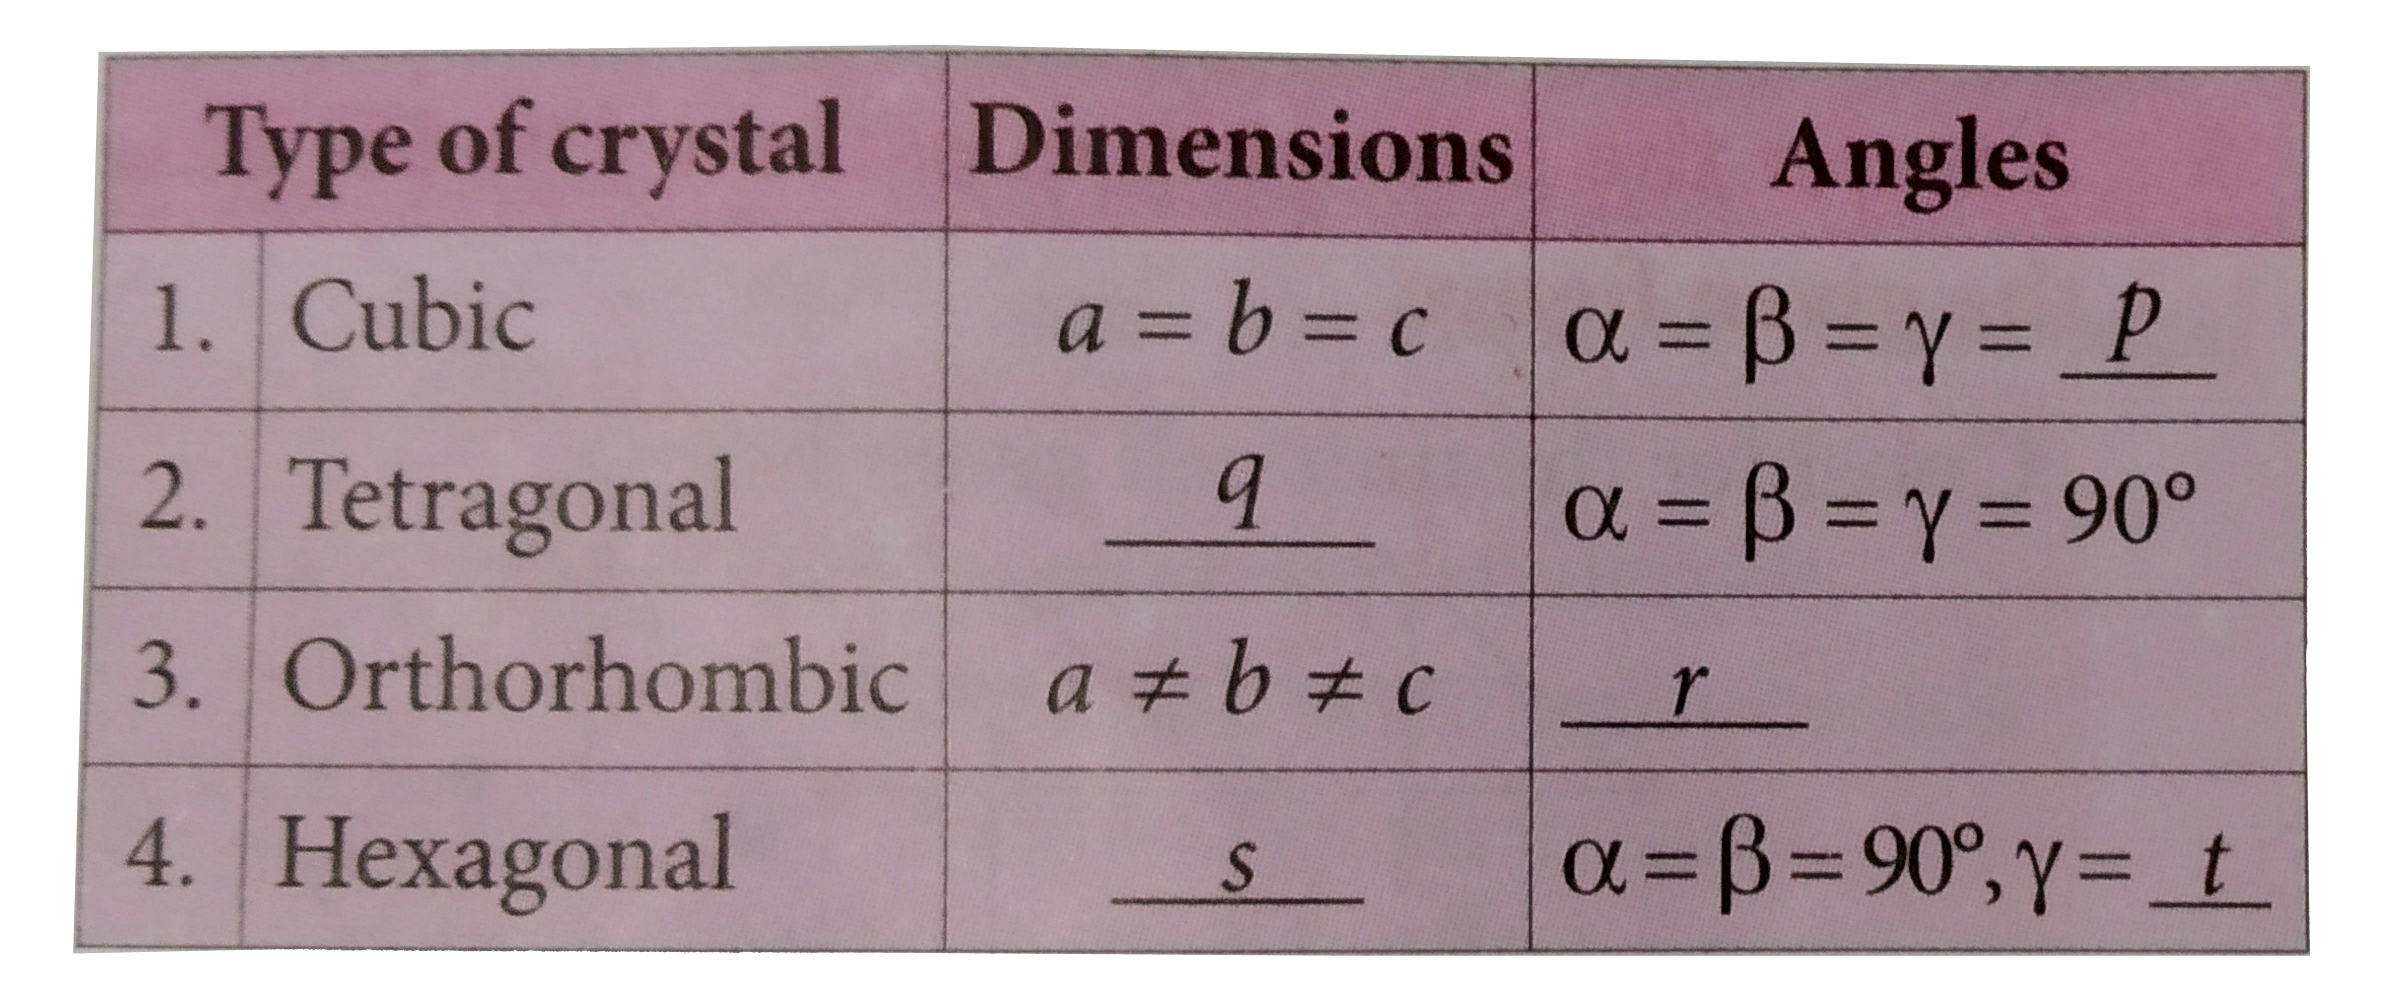 In the table given below, dimensions and angles of various crystals are given . Complete the table by filling the blanks.